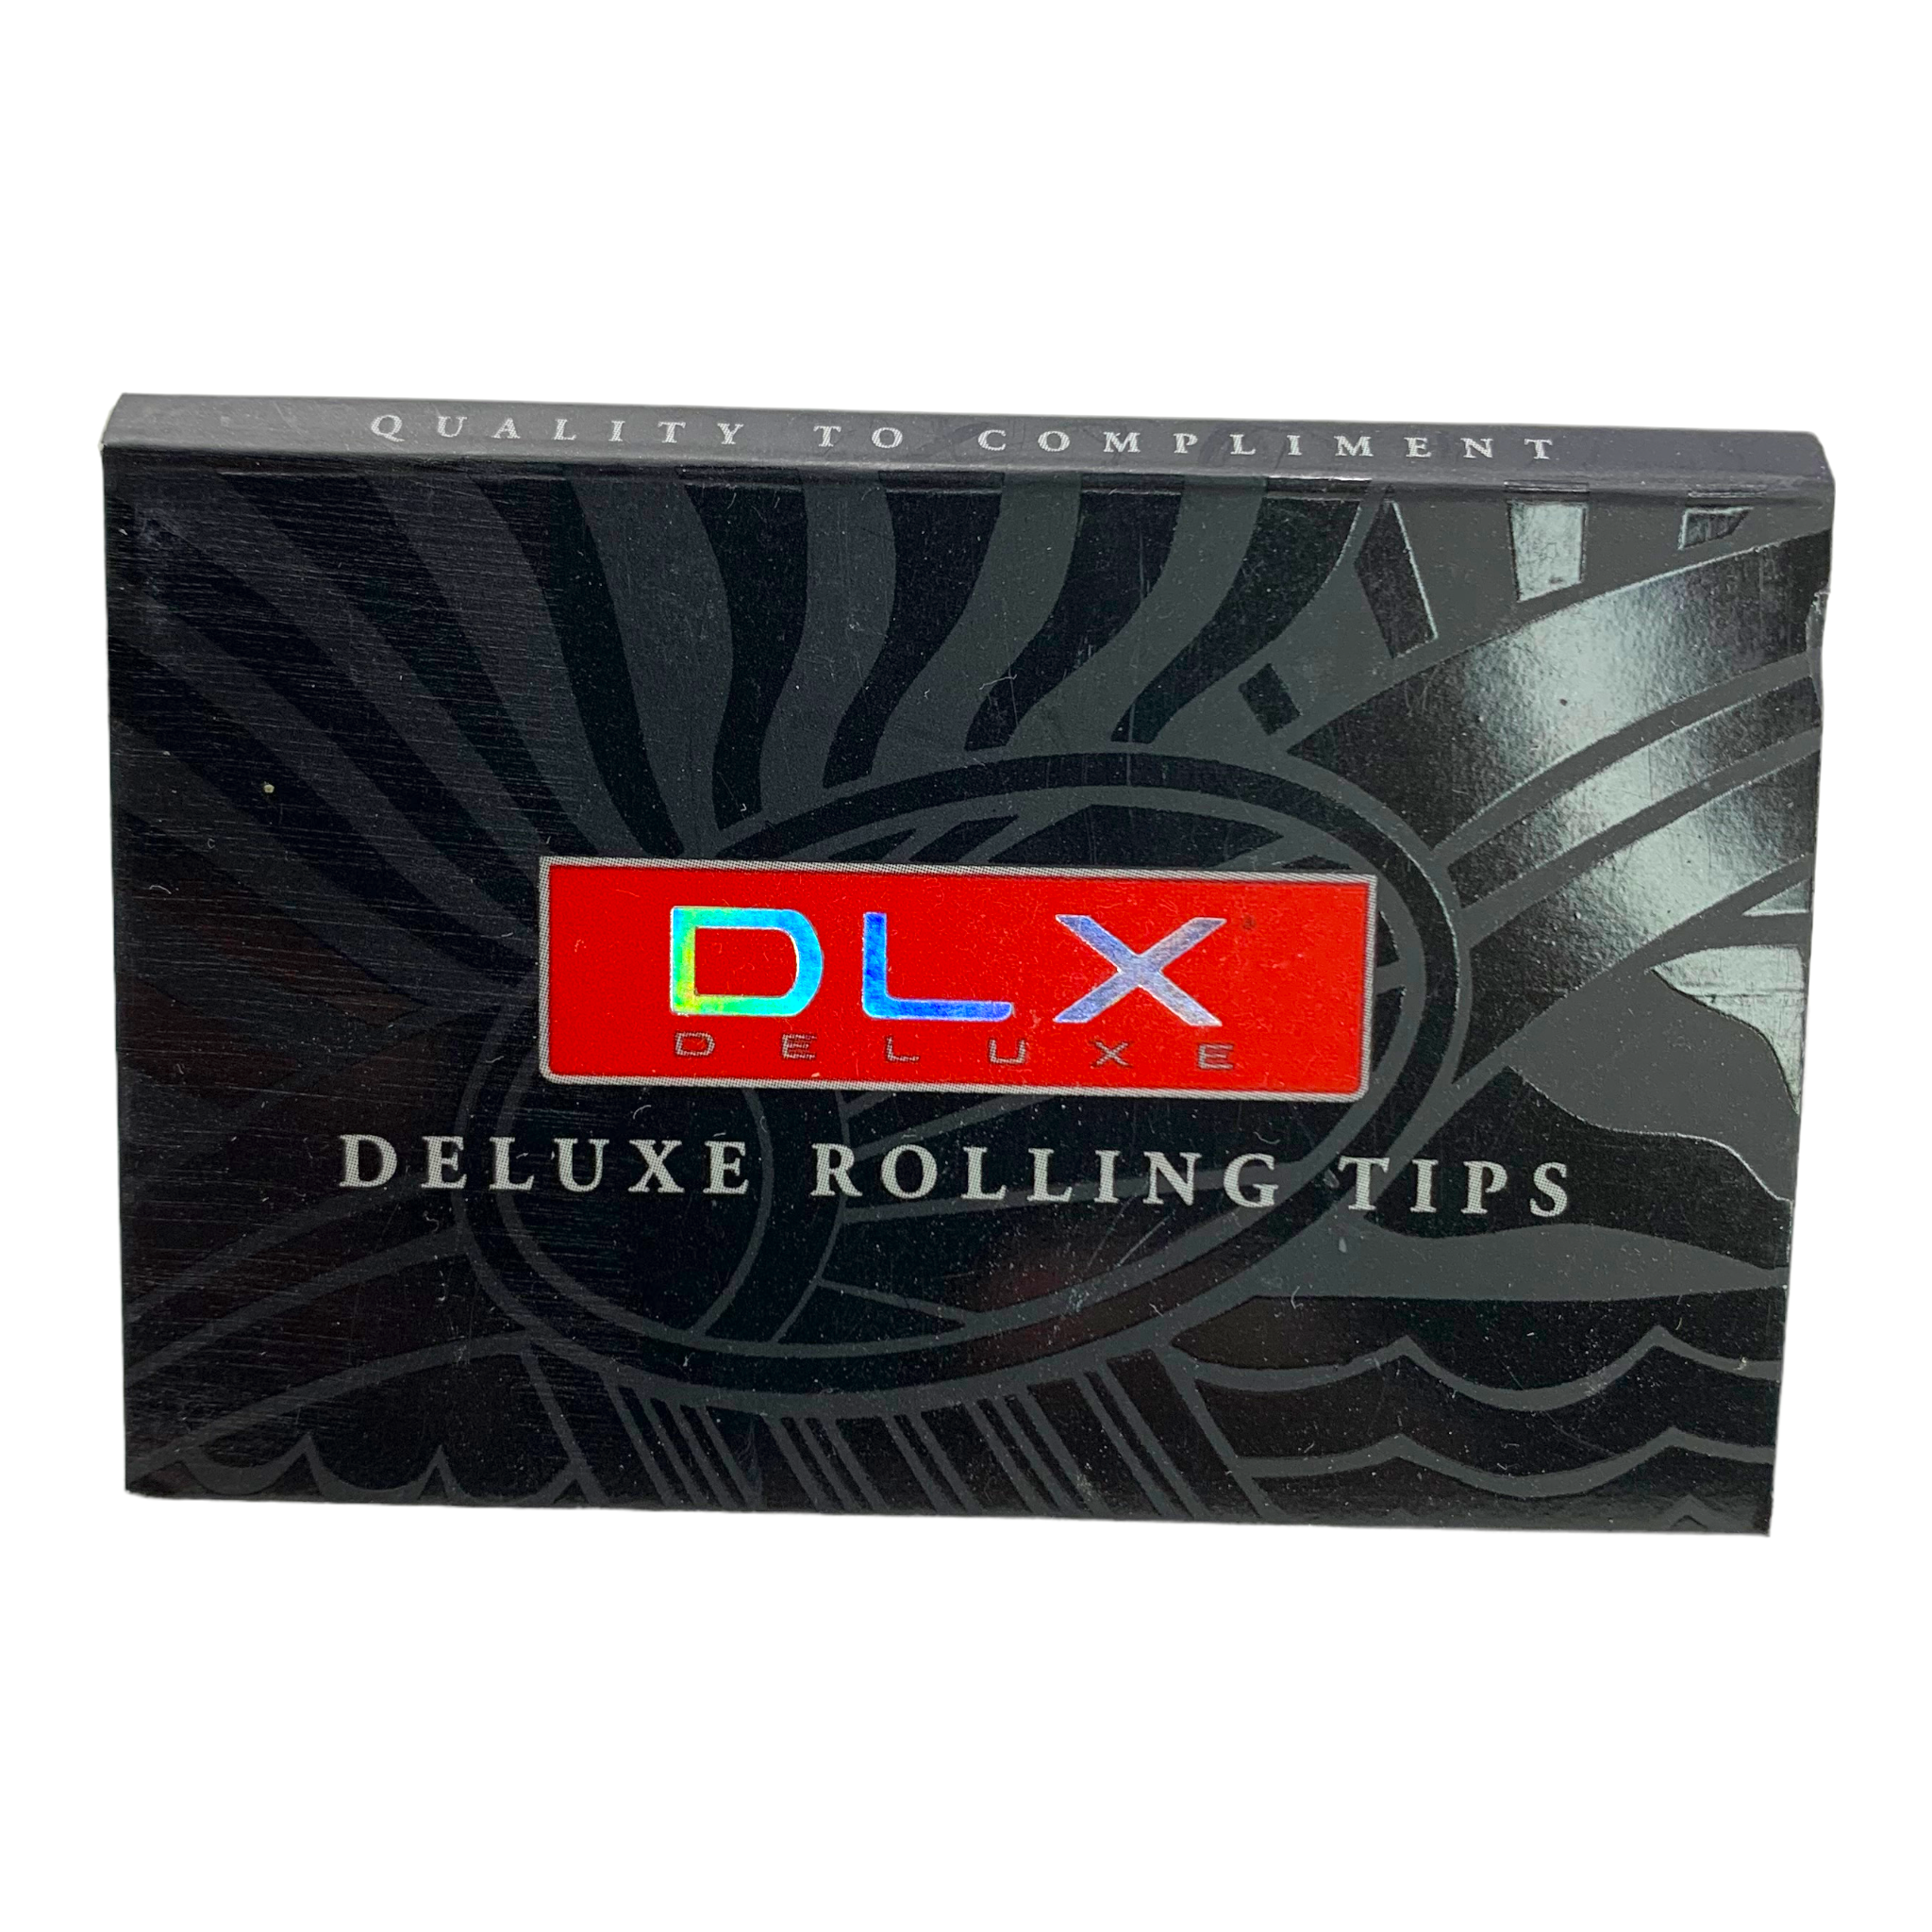 DLX Deluxe Rolling Tips